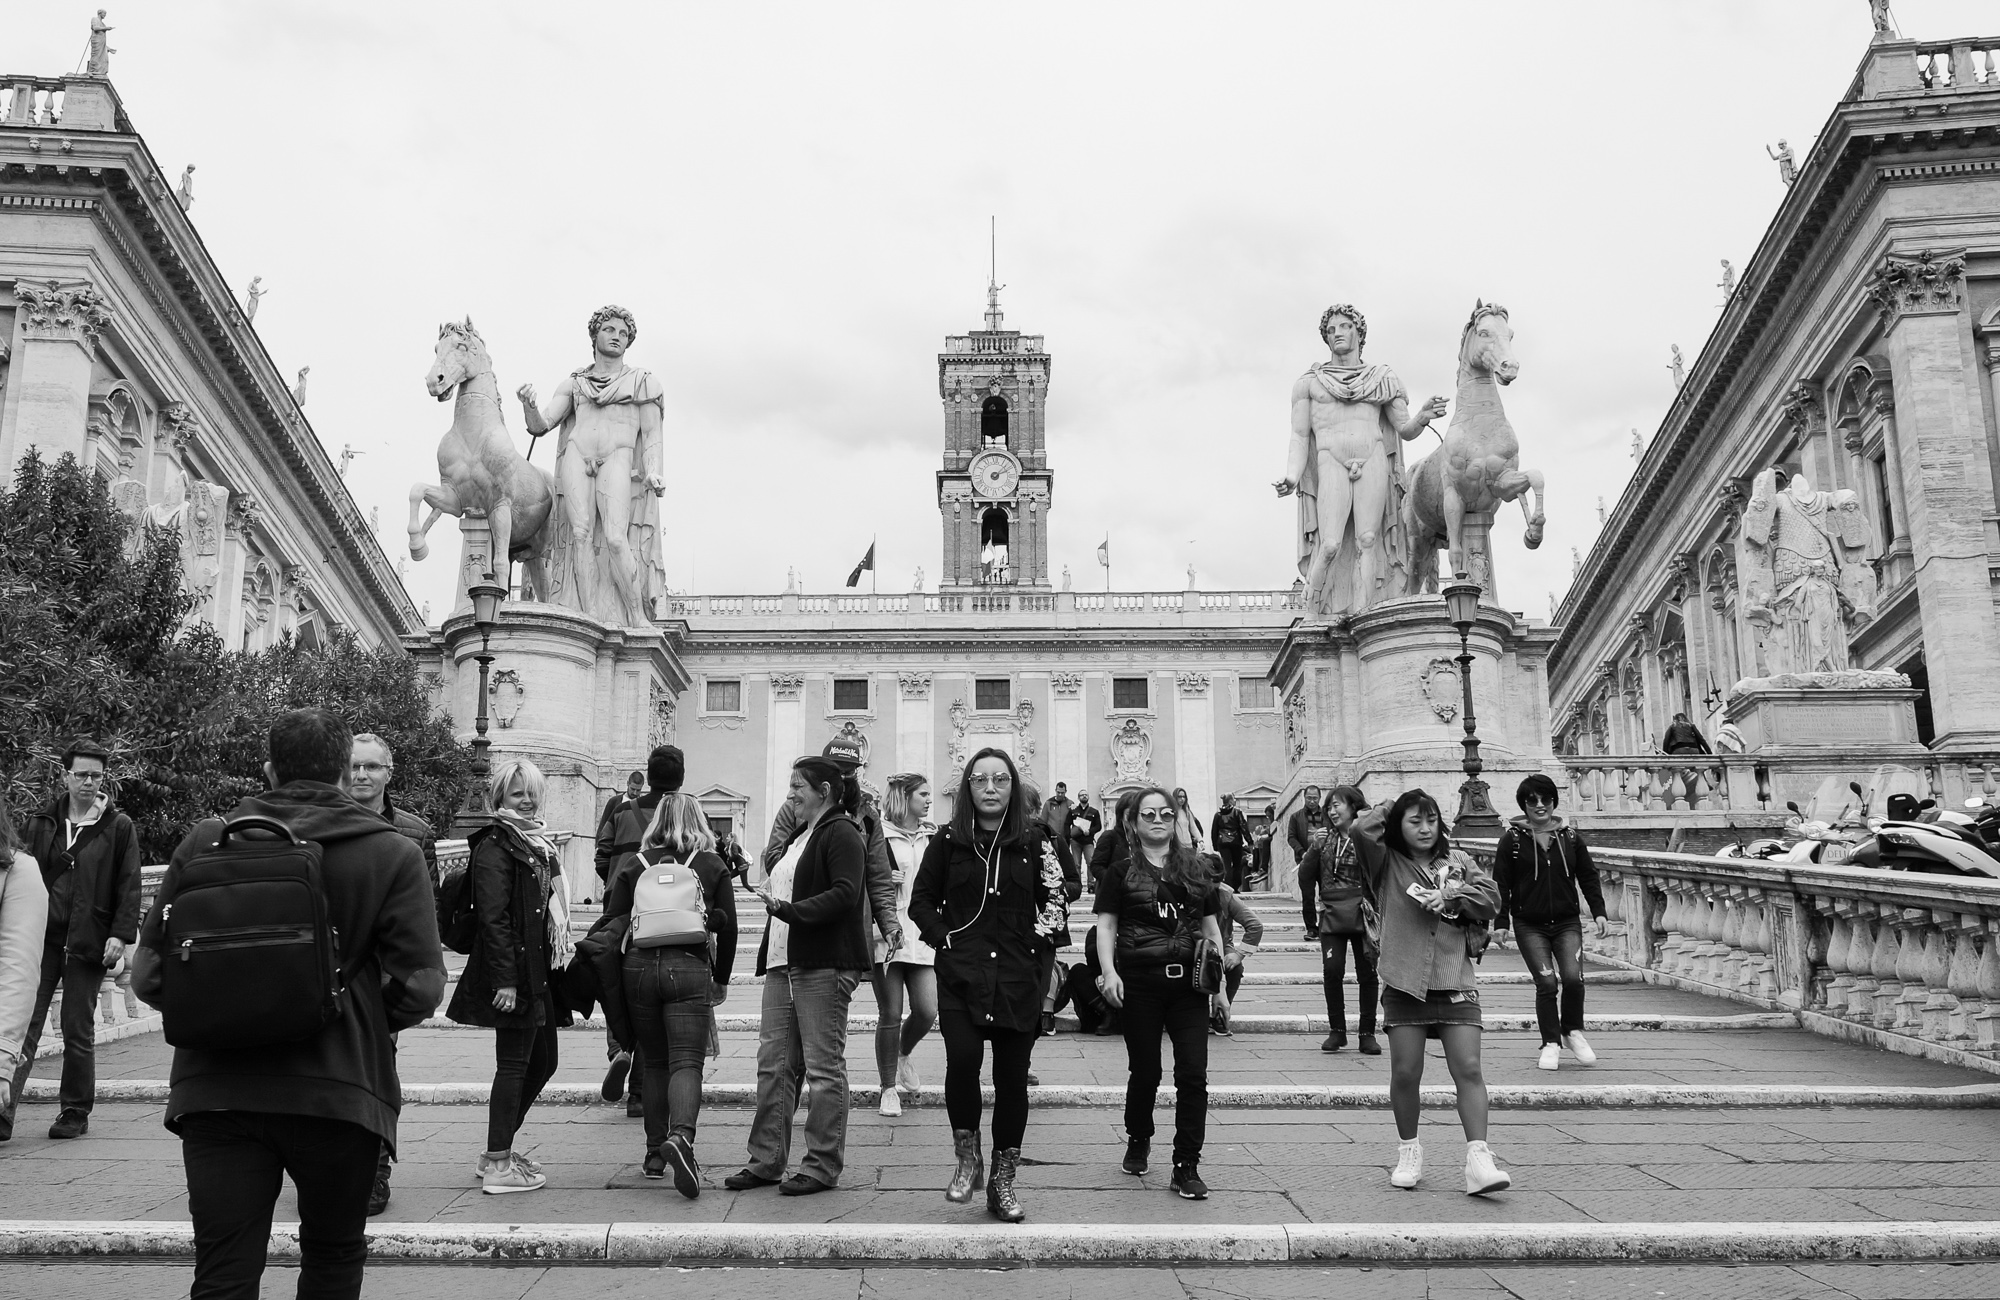 People in front of the Capitoleum, Rome 2018